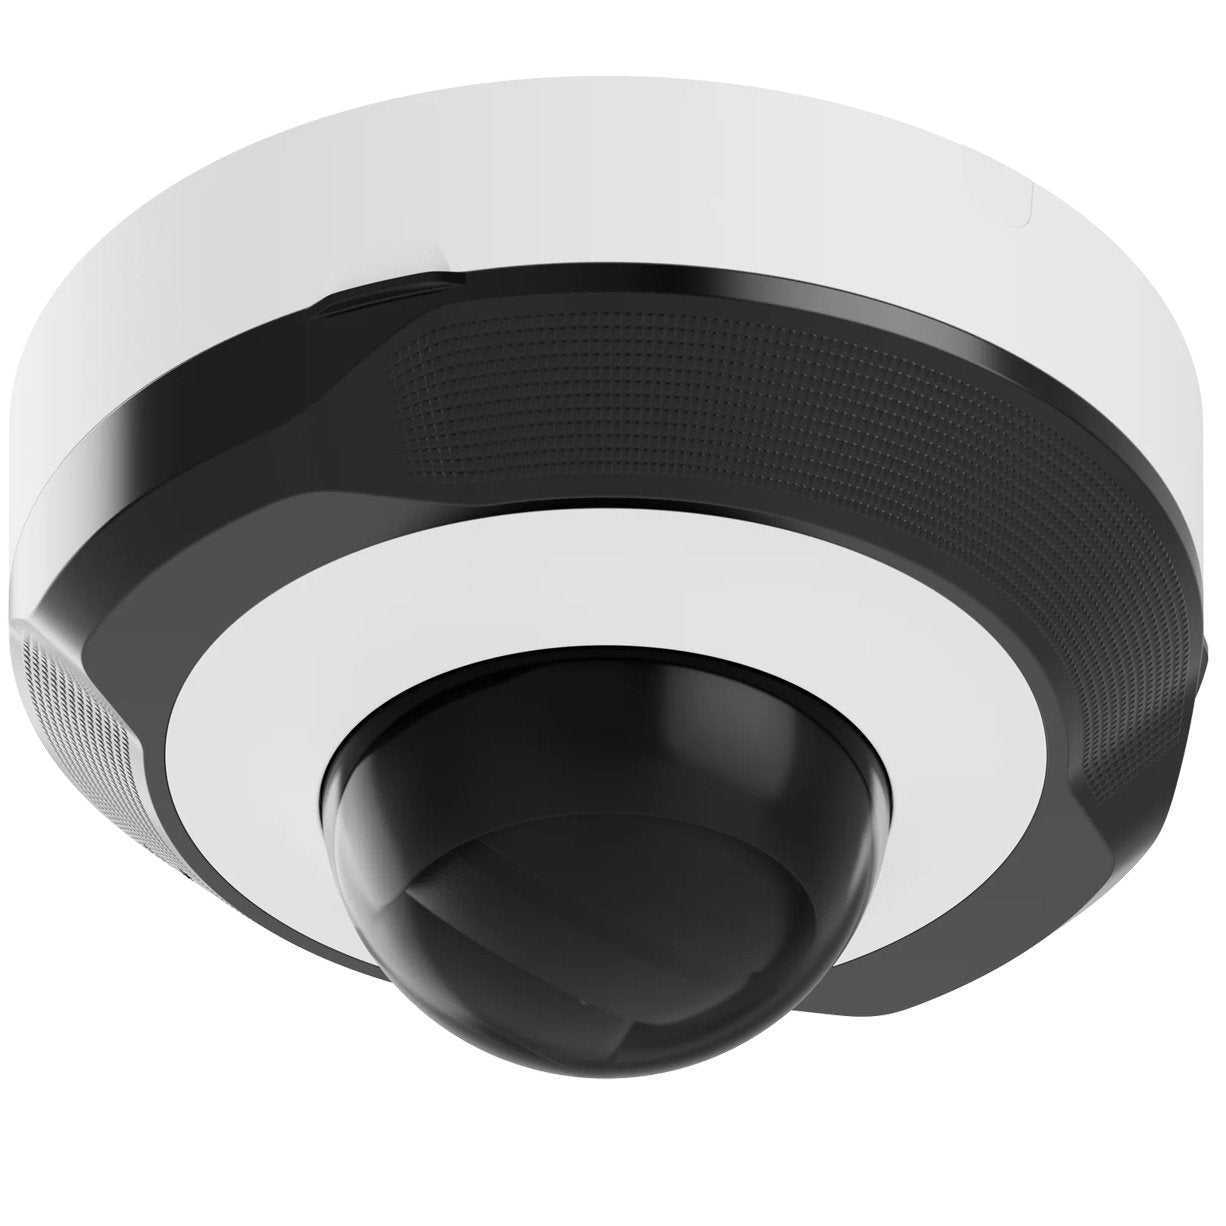 Ajax 5MP IP Baseline AI Series IR Dome Camera, AI-Powered Object Recognition, 2.8mm, 120dB WDR, 15m IR, POE / 12VDC, IP65, MicroSD, Built-in Mic